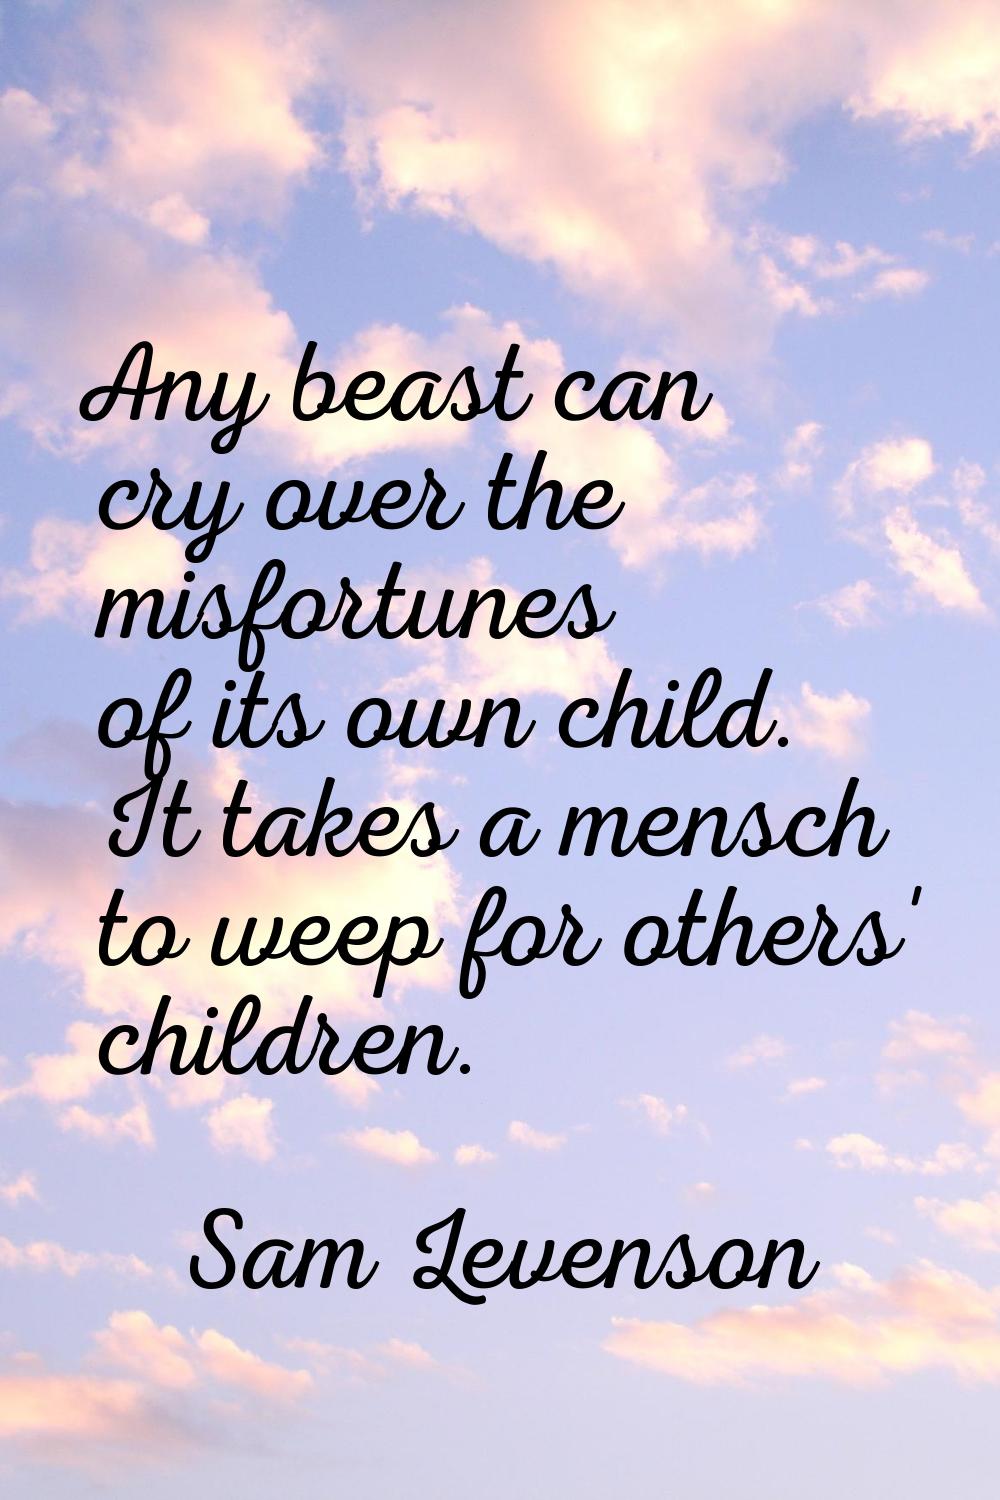 Any beast can cry over the misfortunes of its own child. It takes a mensch to weep for others' chil